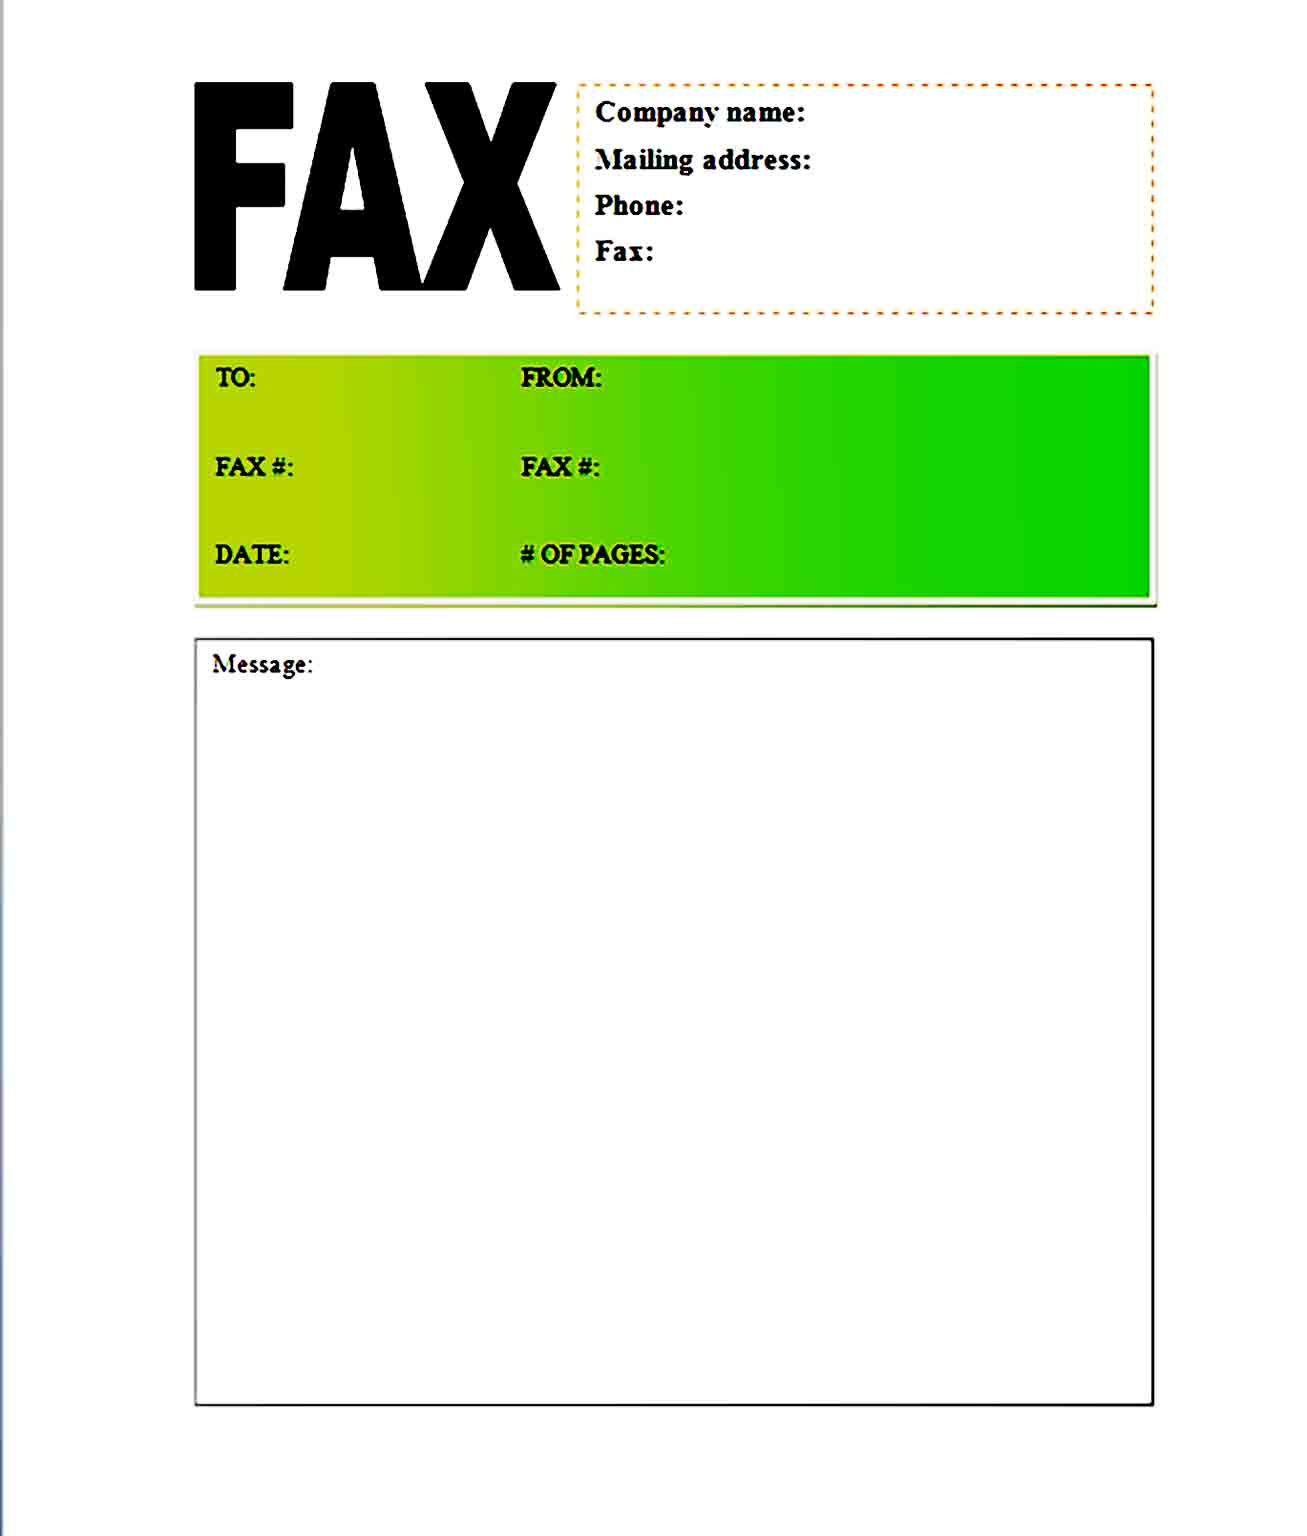 Fax Cover Sheet Template 04